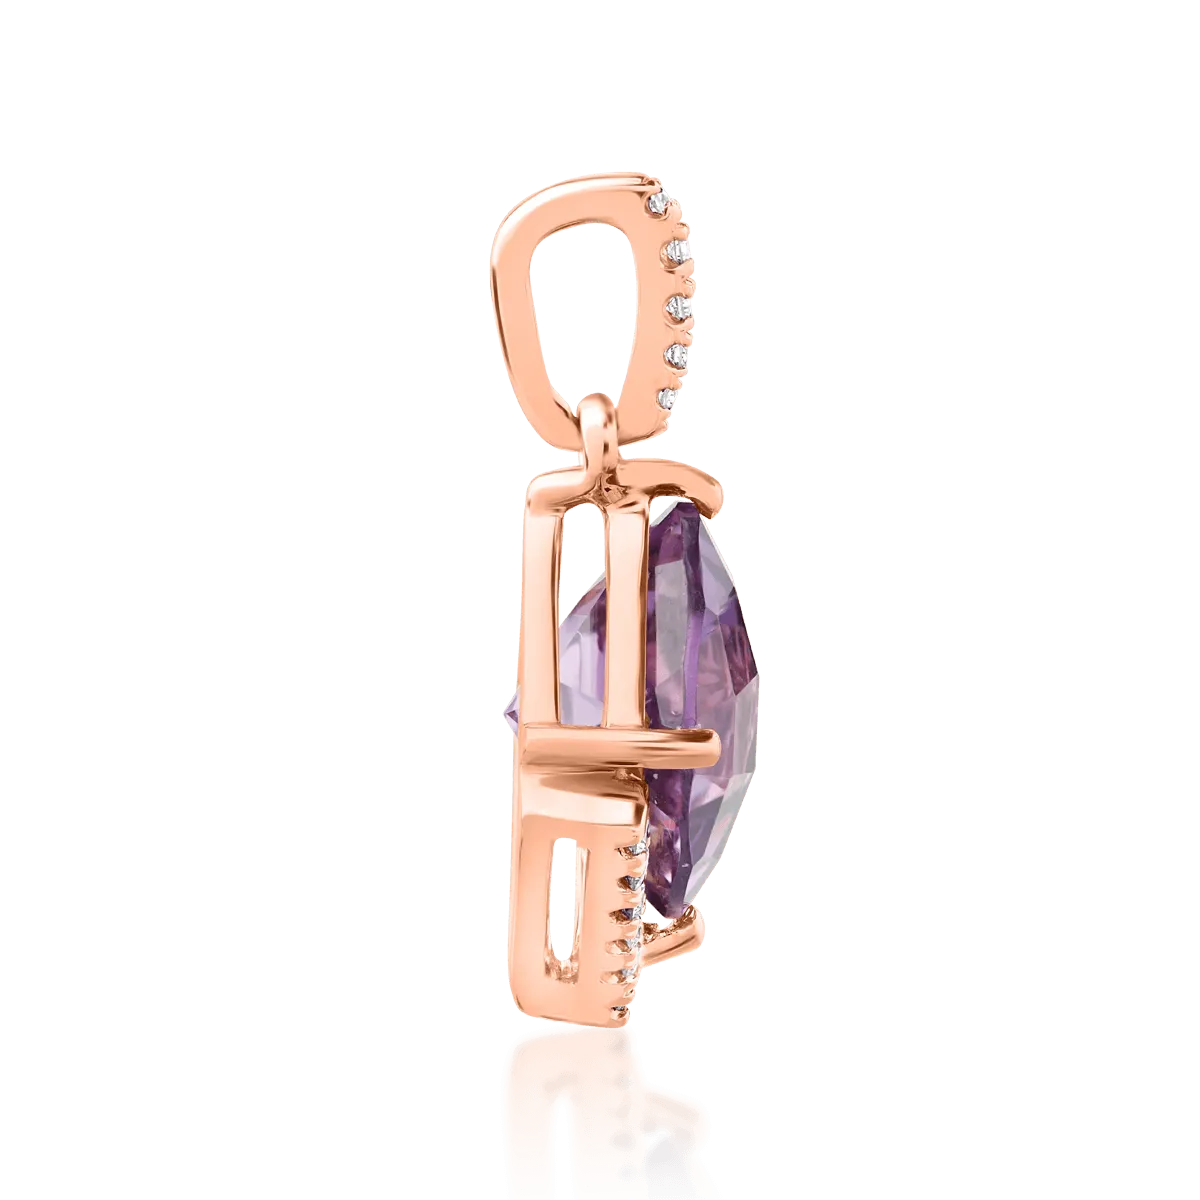 18K rose gold pendant with amethyst of 2.3ct and diamonds of 0.08ct